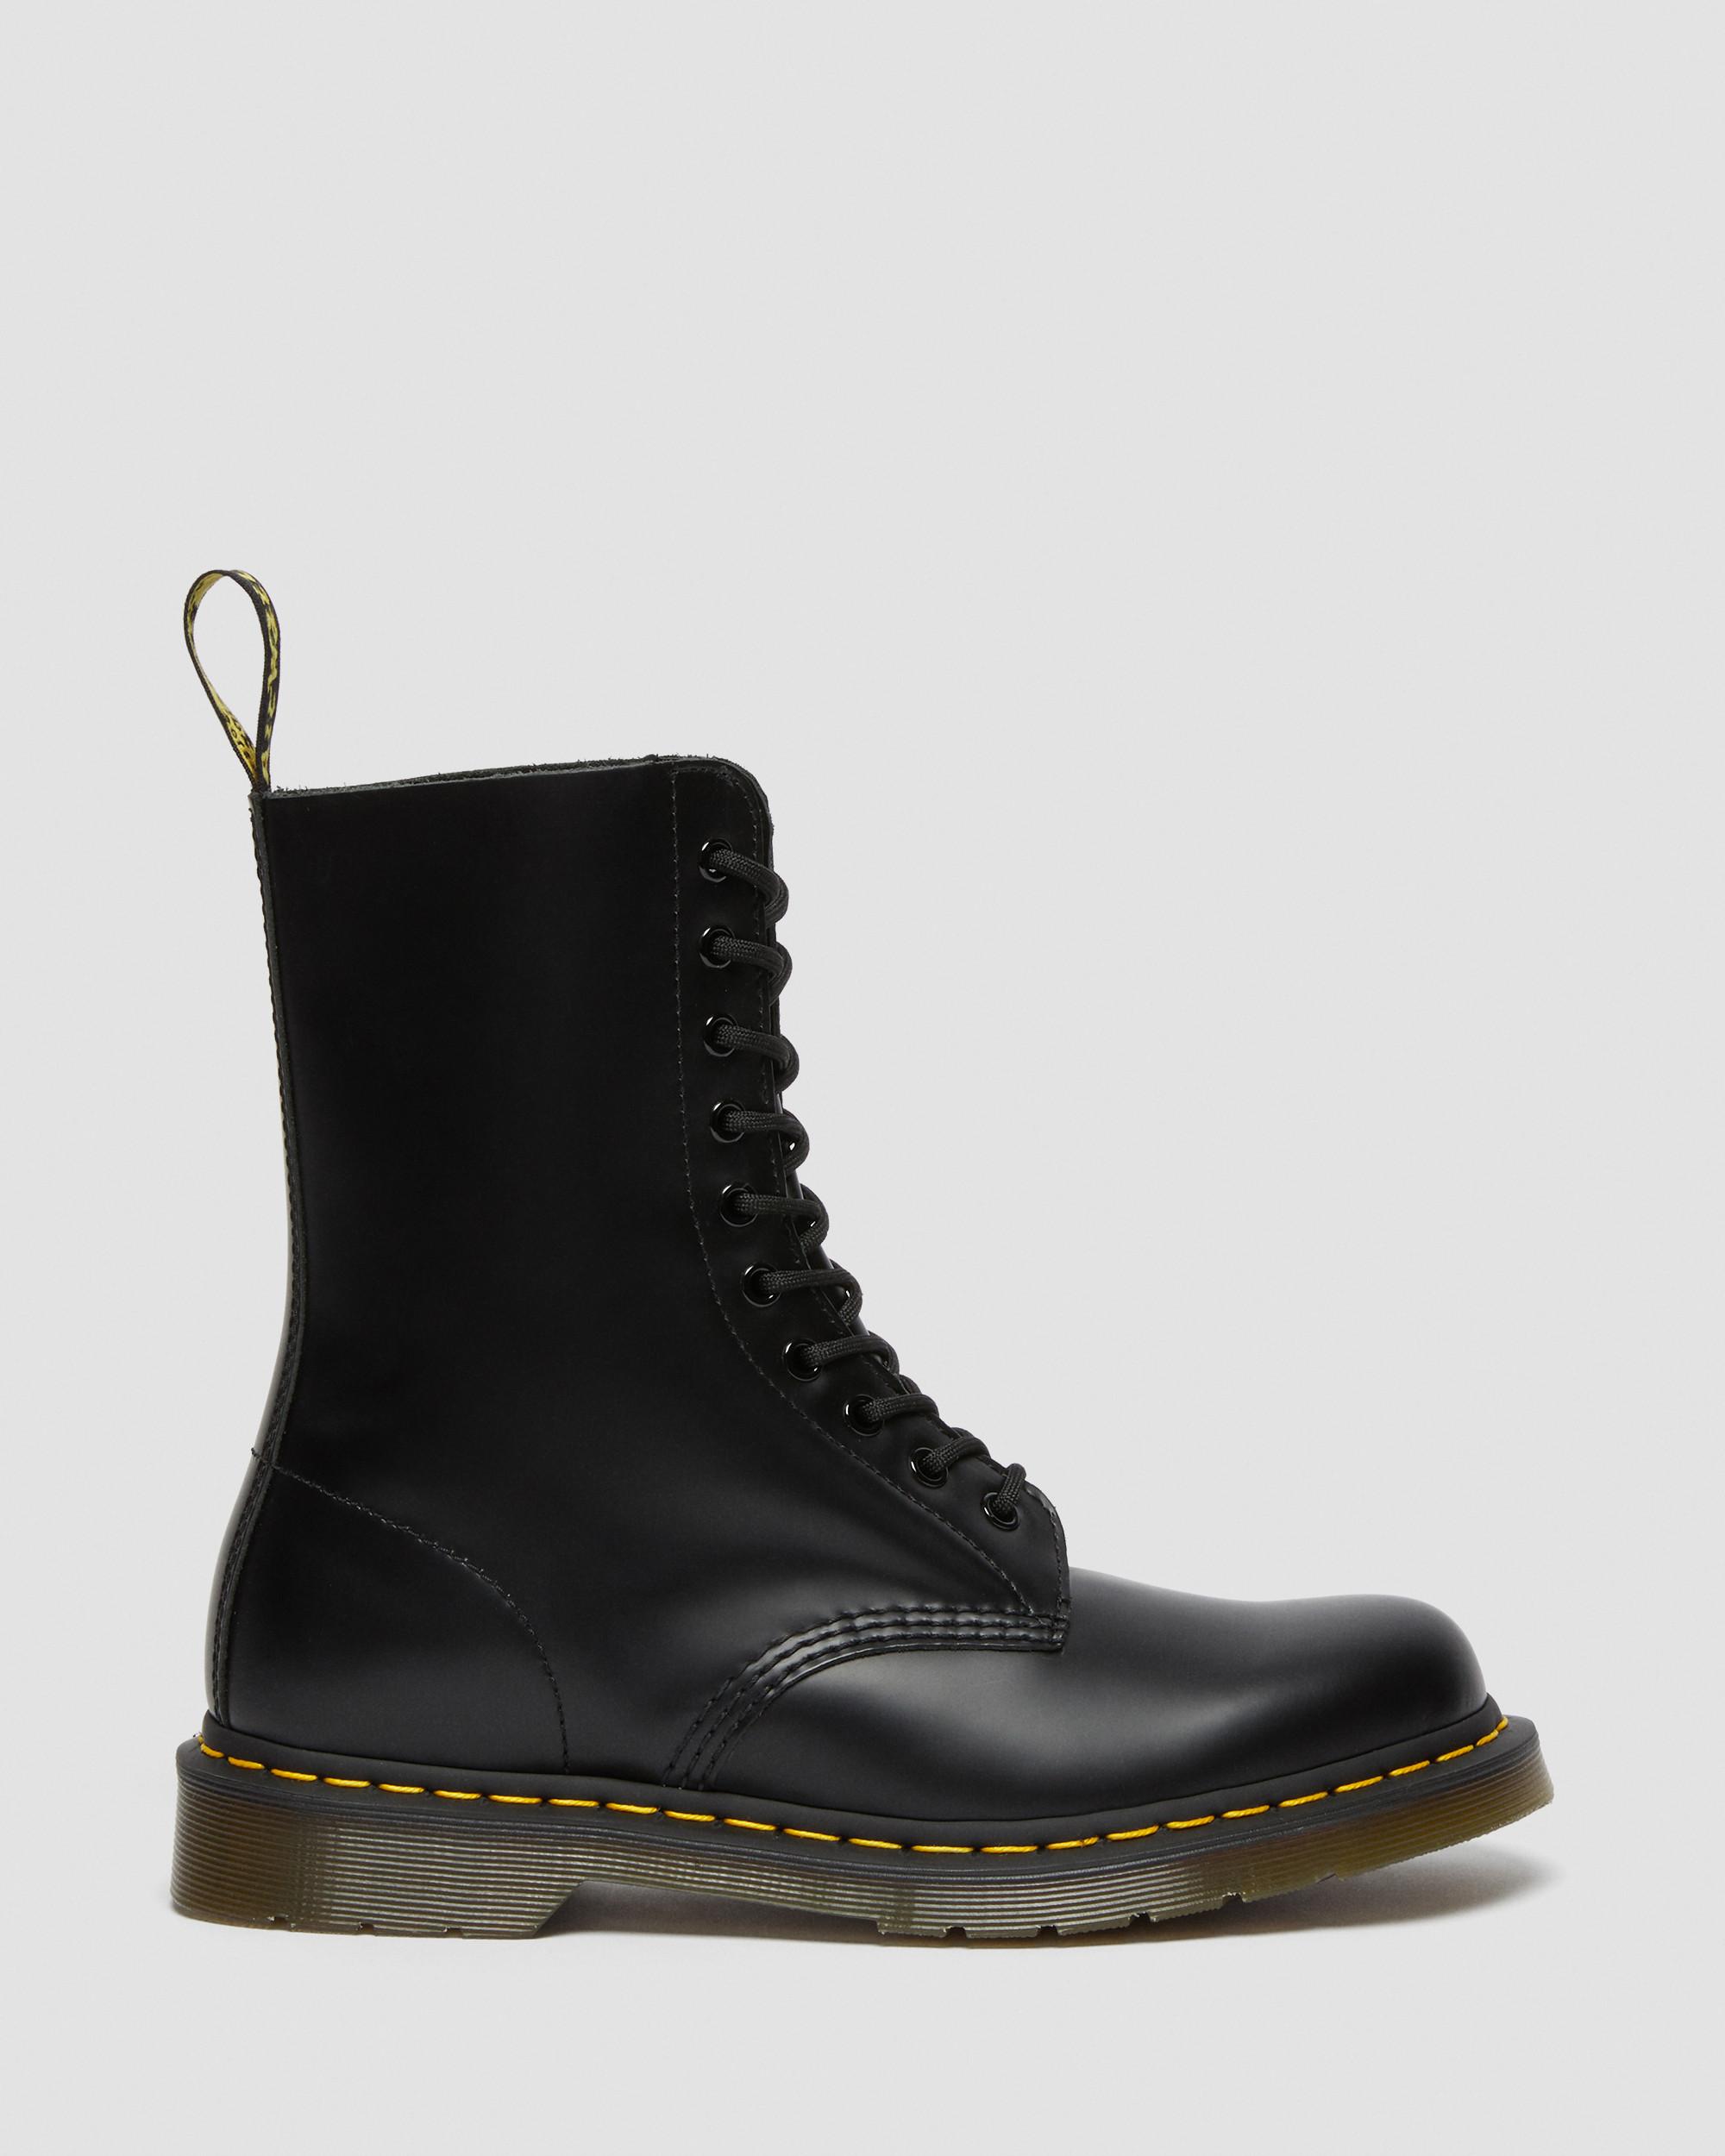 Black Dr Martens 1490z Mens Smooth Leather Boots 